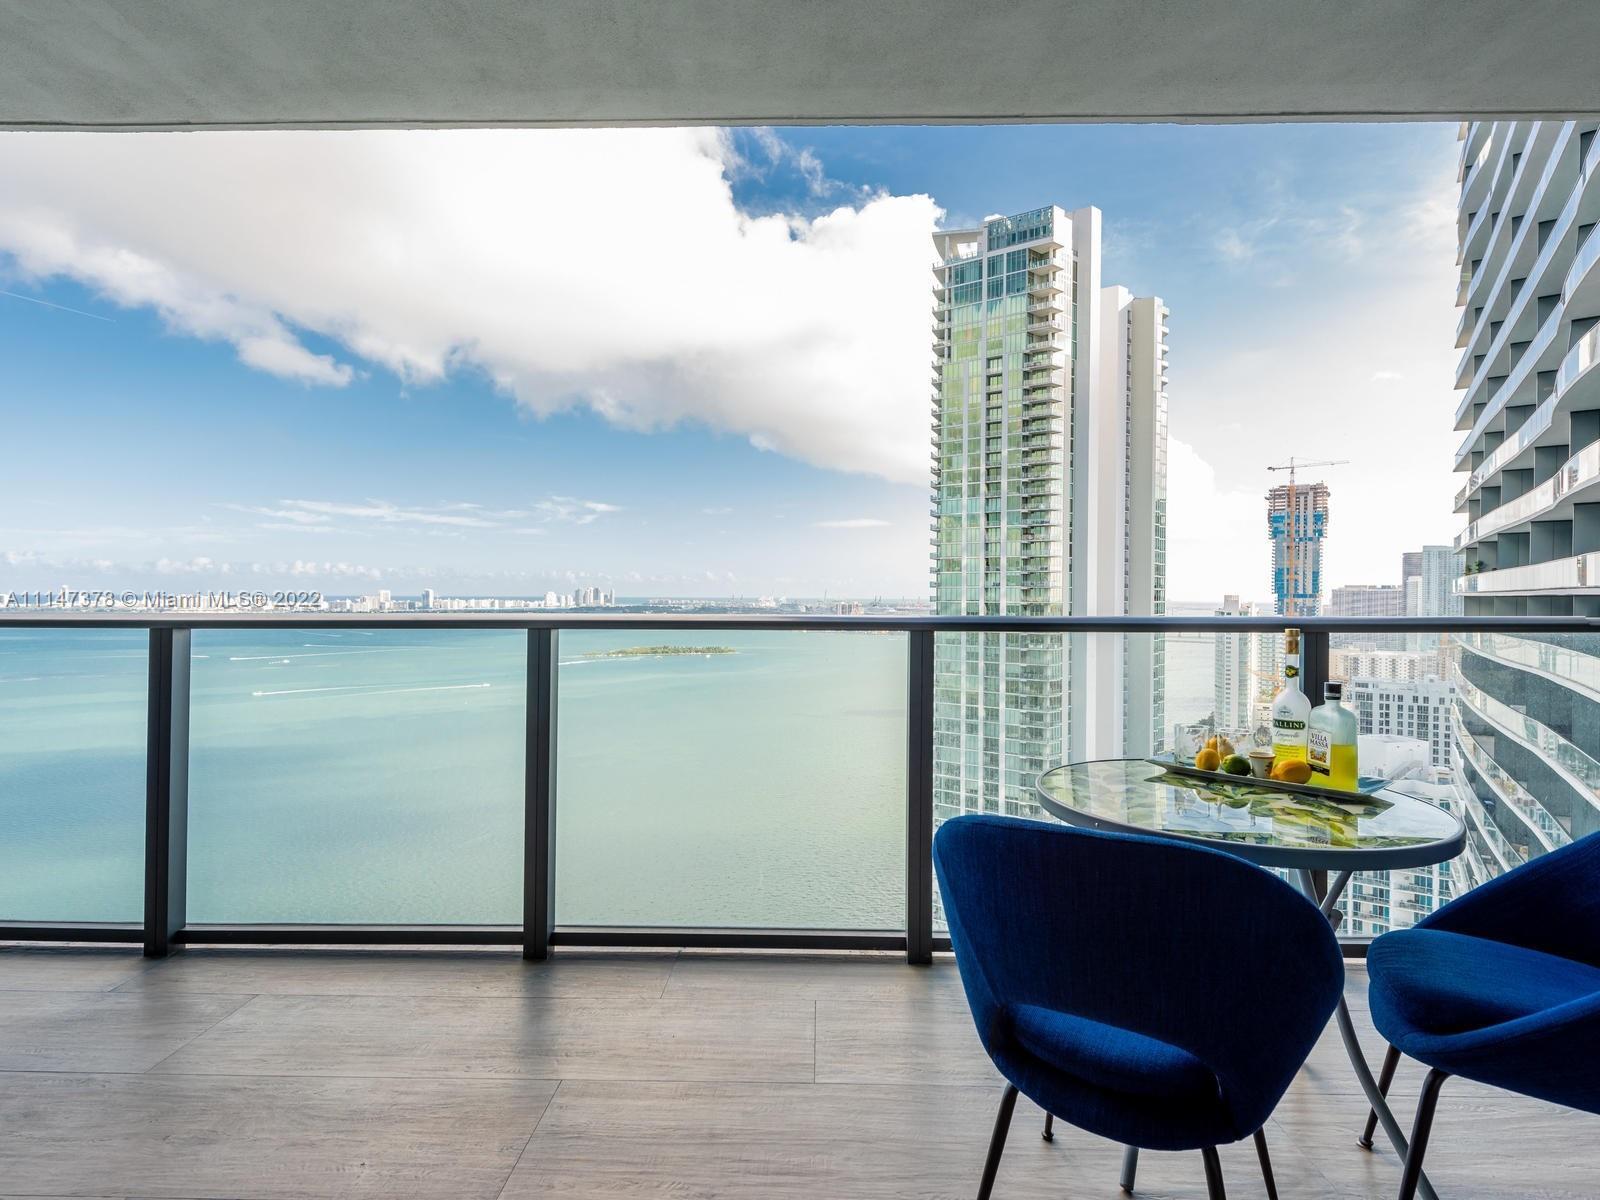 PARAISO BAY. Completely remodeled with contemporary MOD/Euro/Miami design concept and over $150K in 